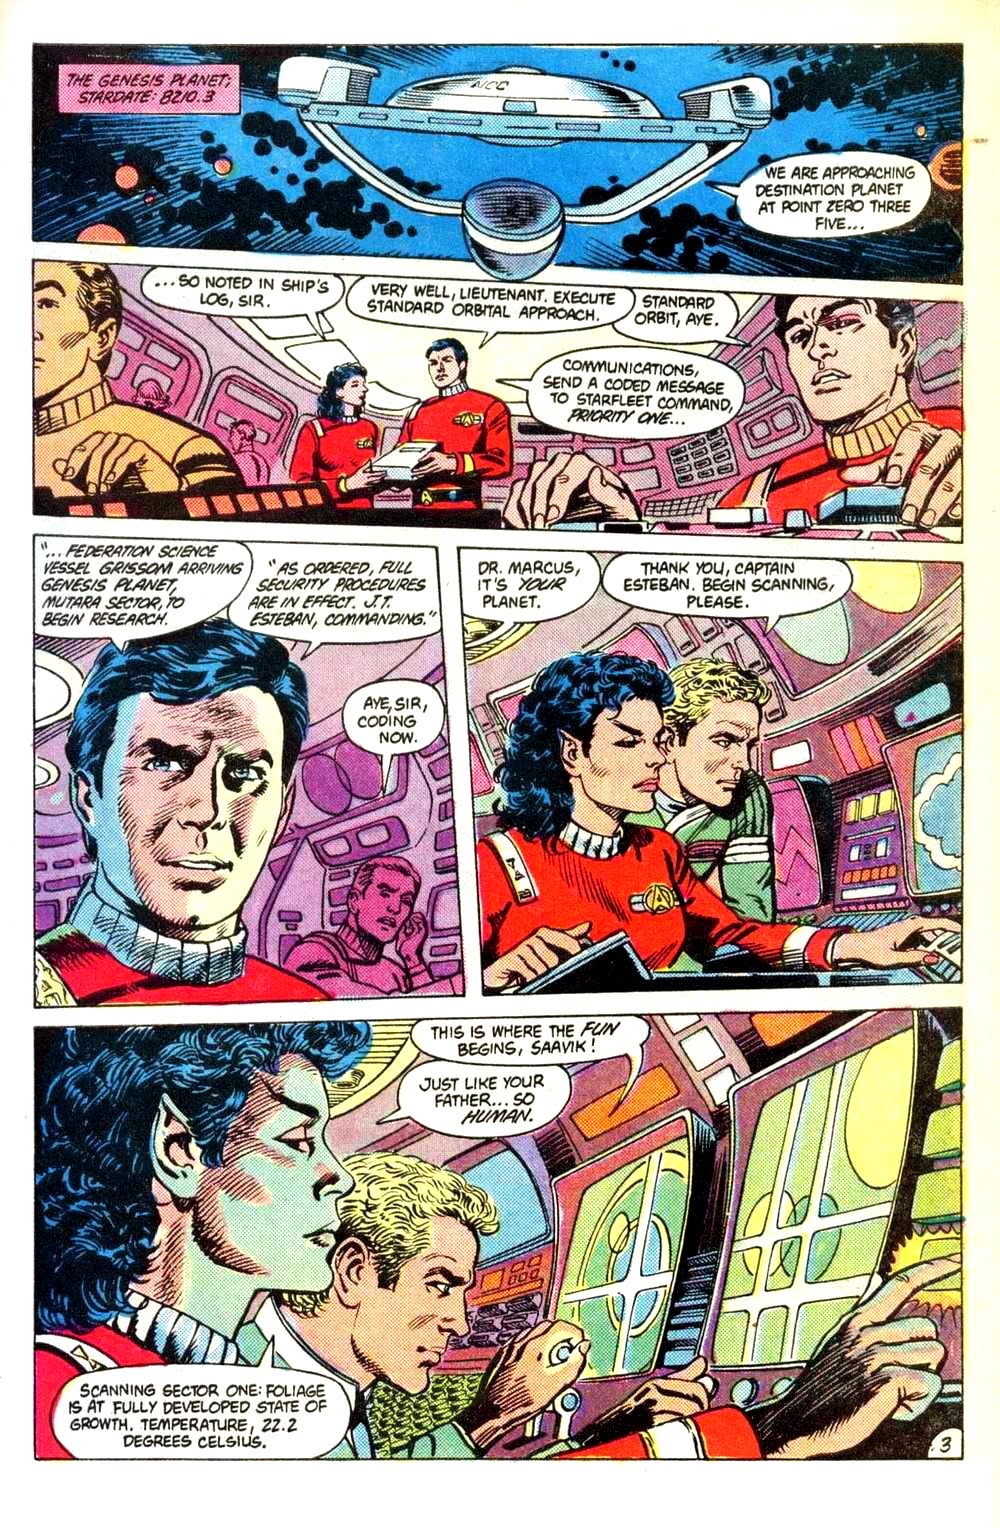 Read online Star Trek III: The Search for Spock comic -  Issue # Full - 5